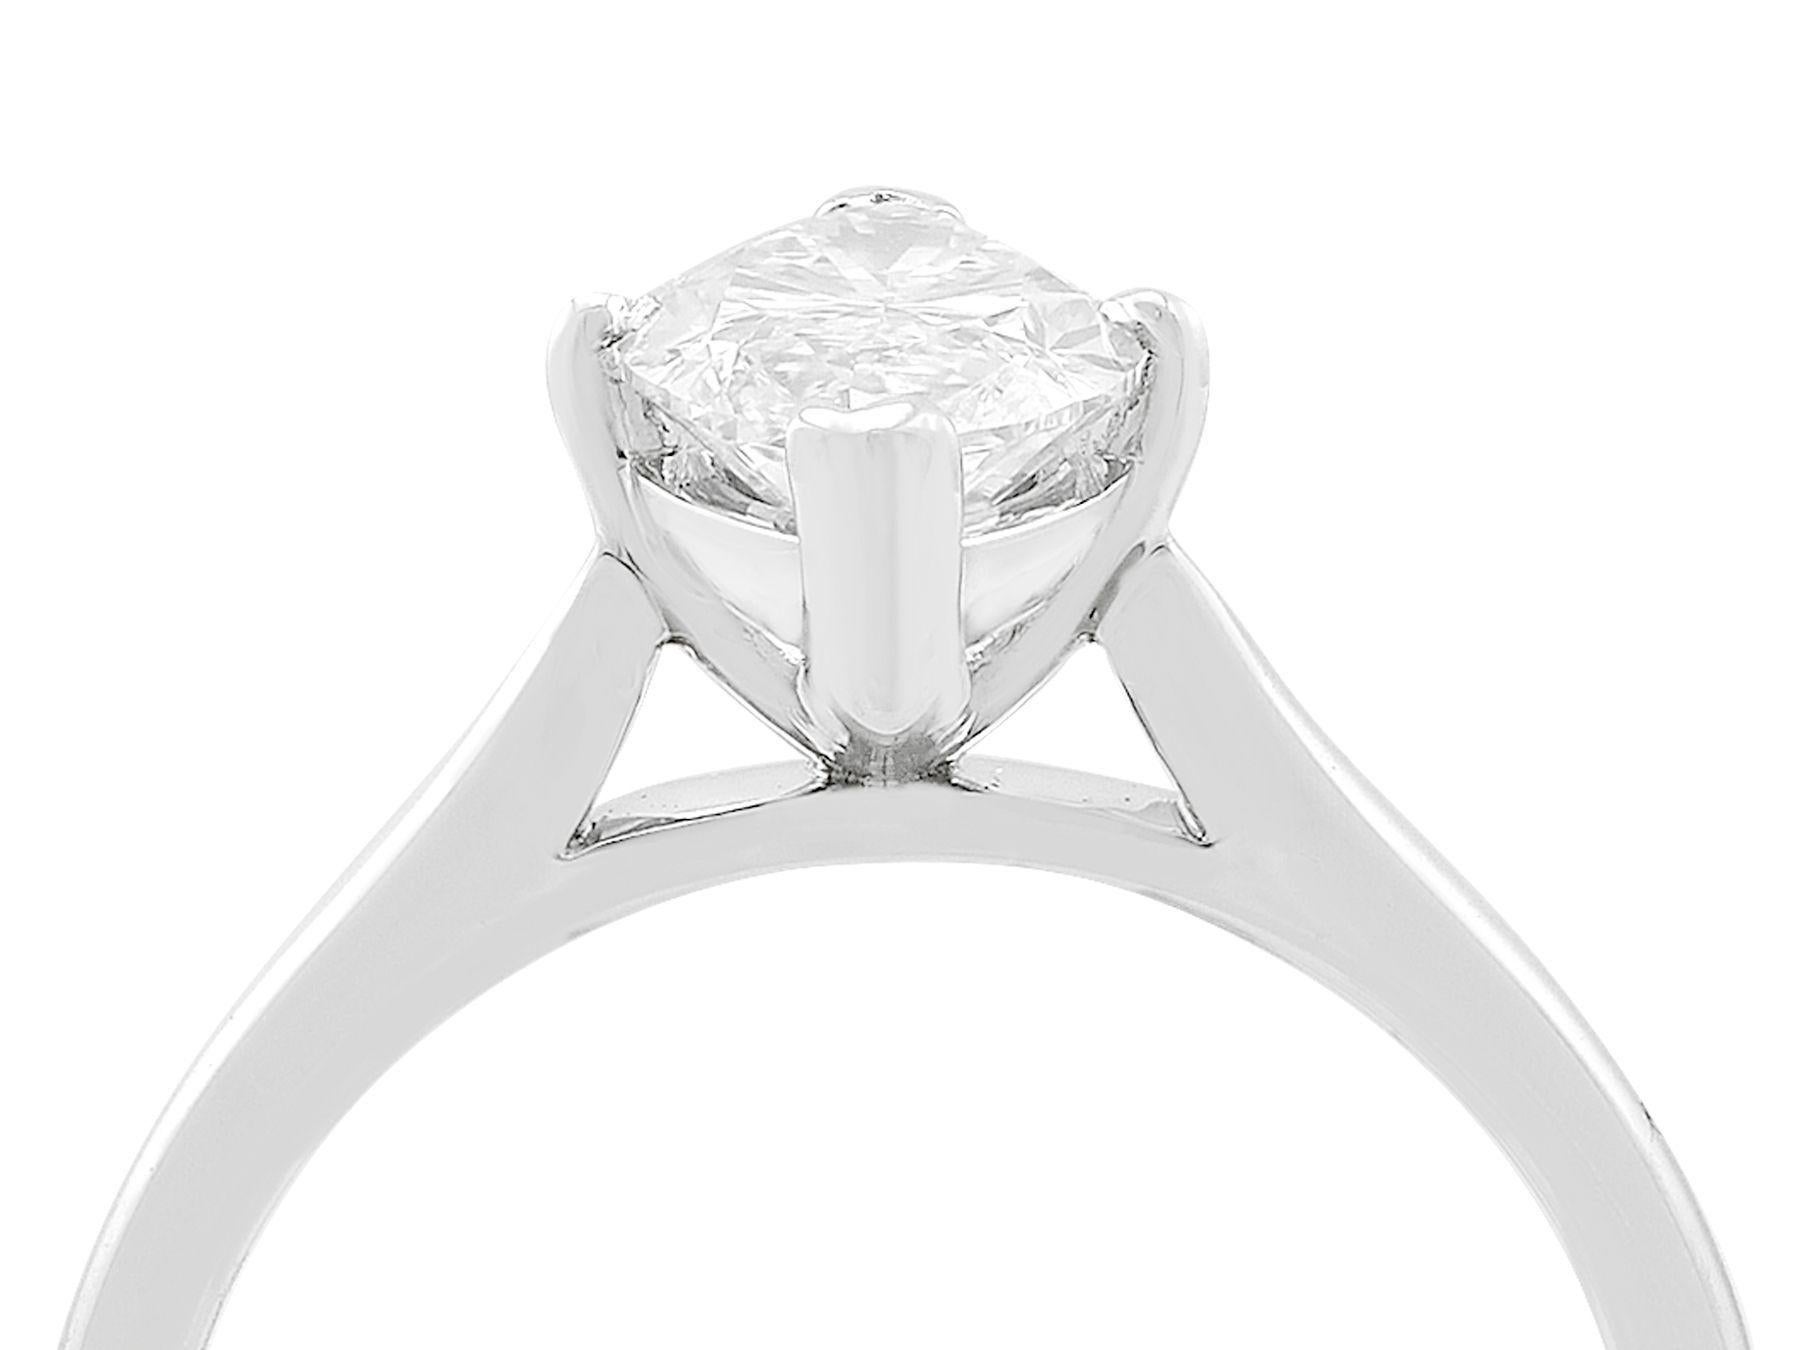 A stunning vintage 1.41 carat diamond and 18 karat white gold solitaire style engagement ring; part of our diverse diamond jewelry and estate jewelry collections.

This stunning, fine and impressive marquise cut diamond solitaire engagement ring has